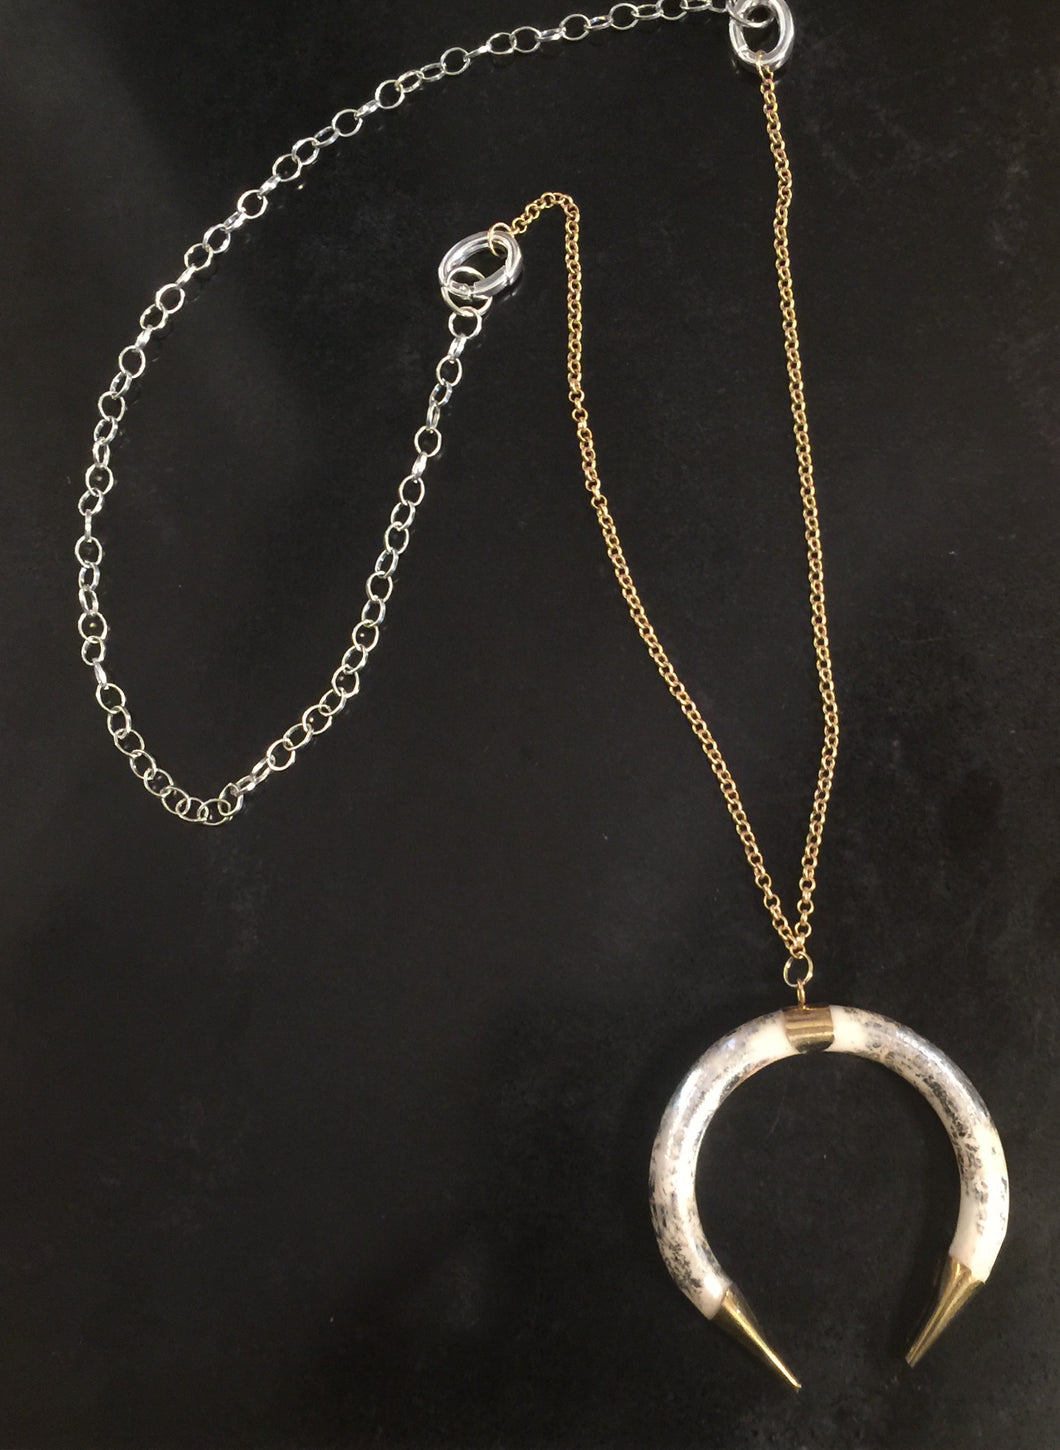 The Shakira - Convertible Horn Necklace